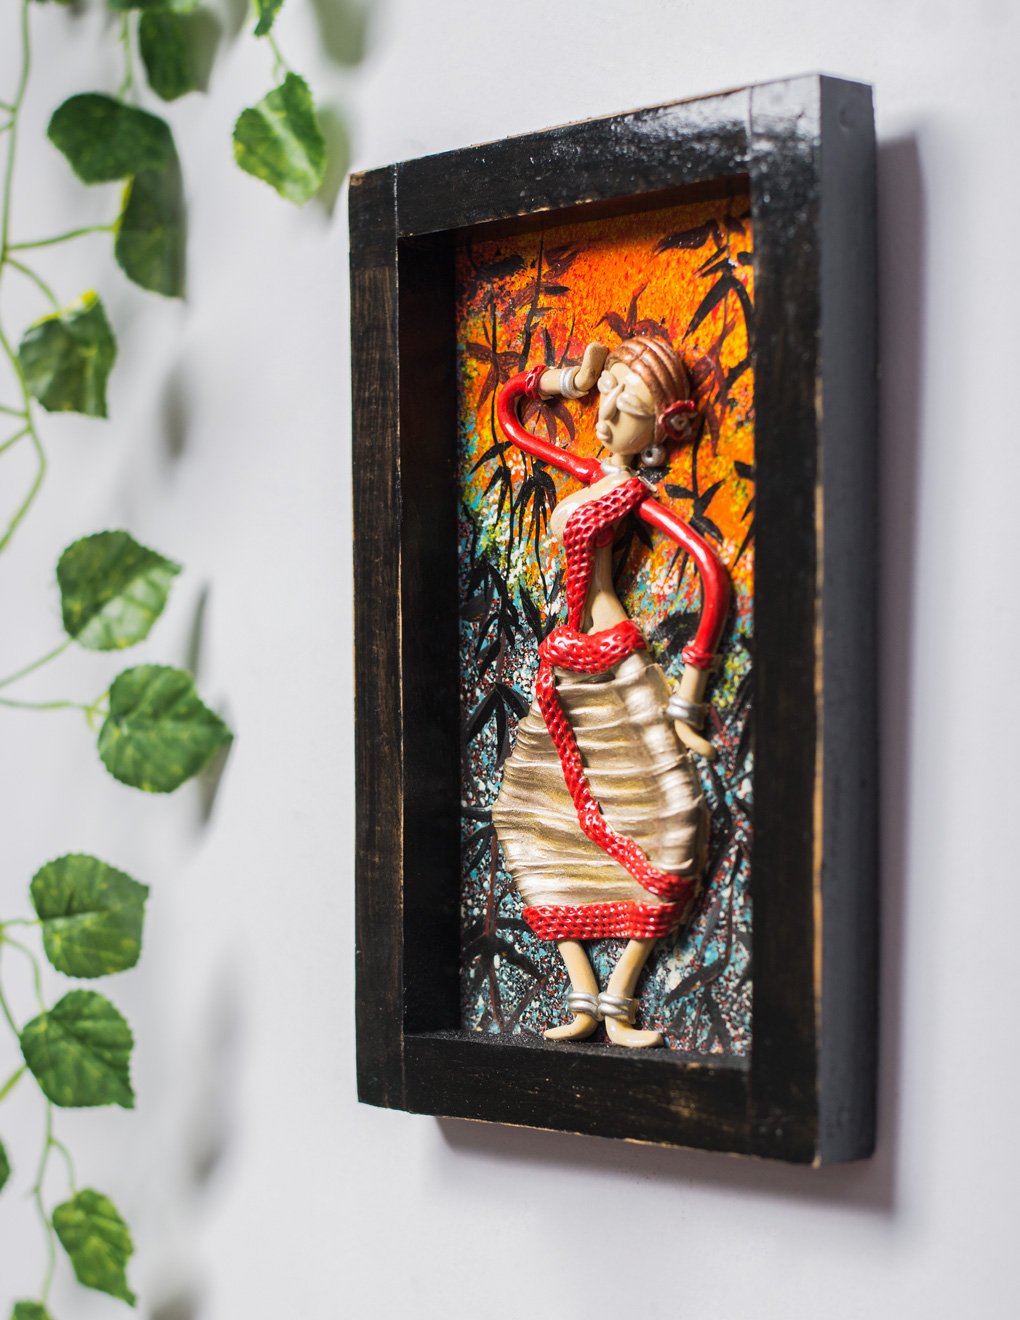 Handmade Wooden Wall Hanging with Hand Painted - Artytales